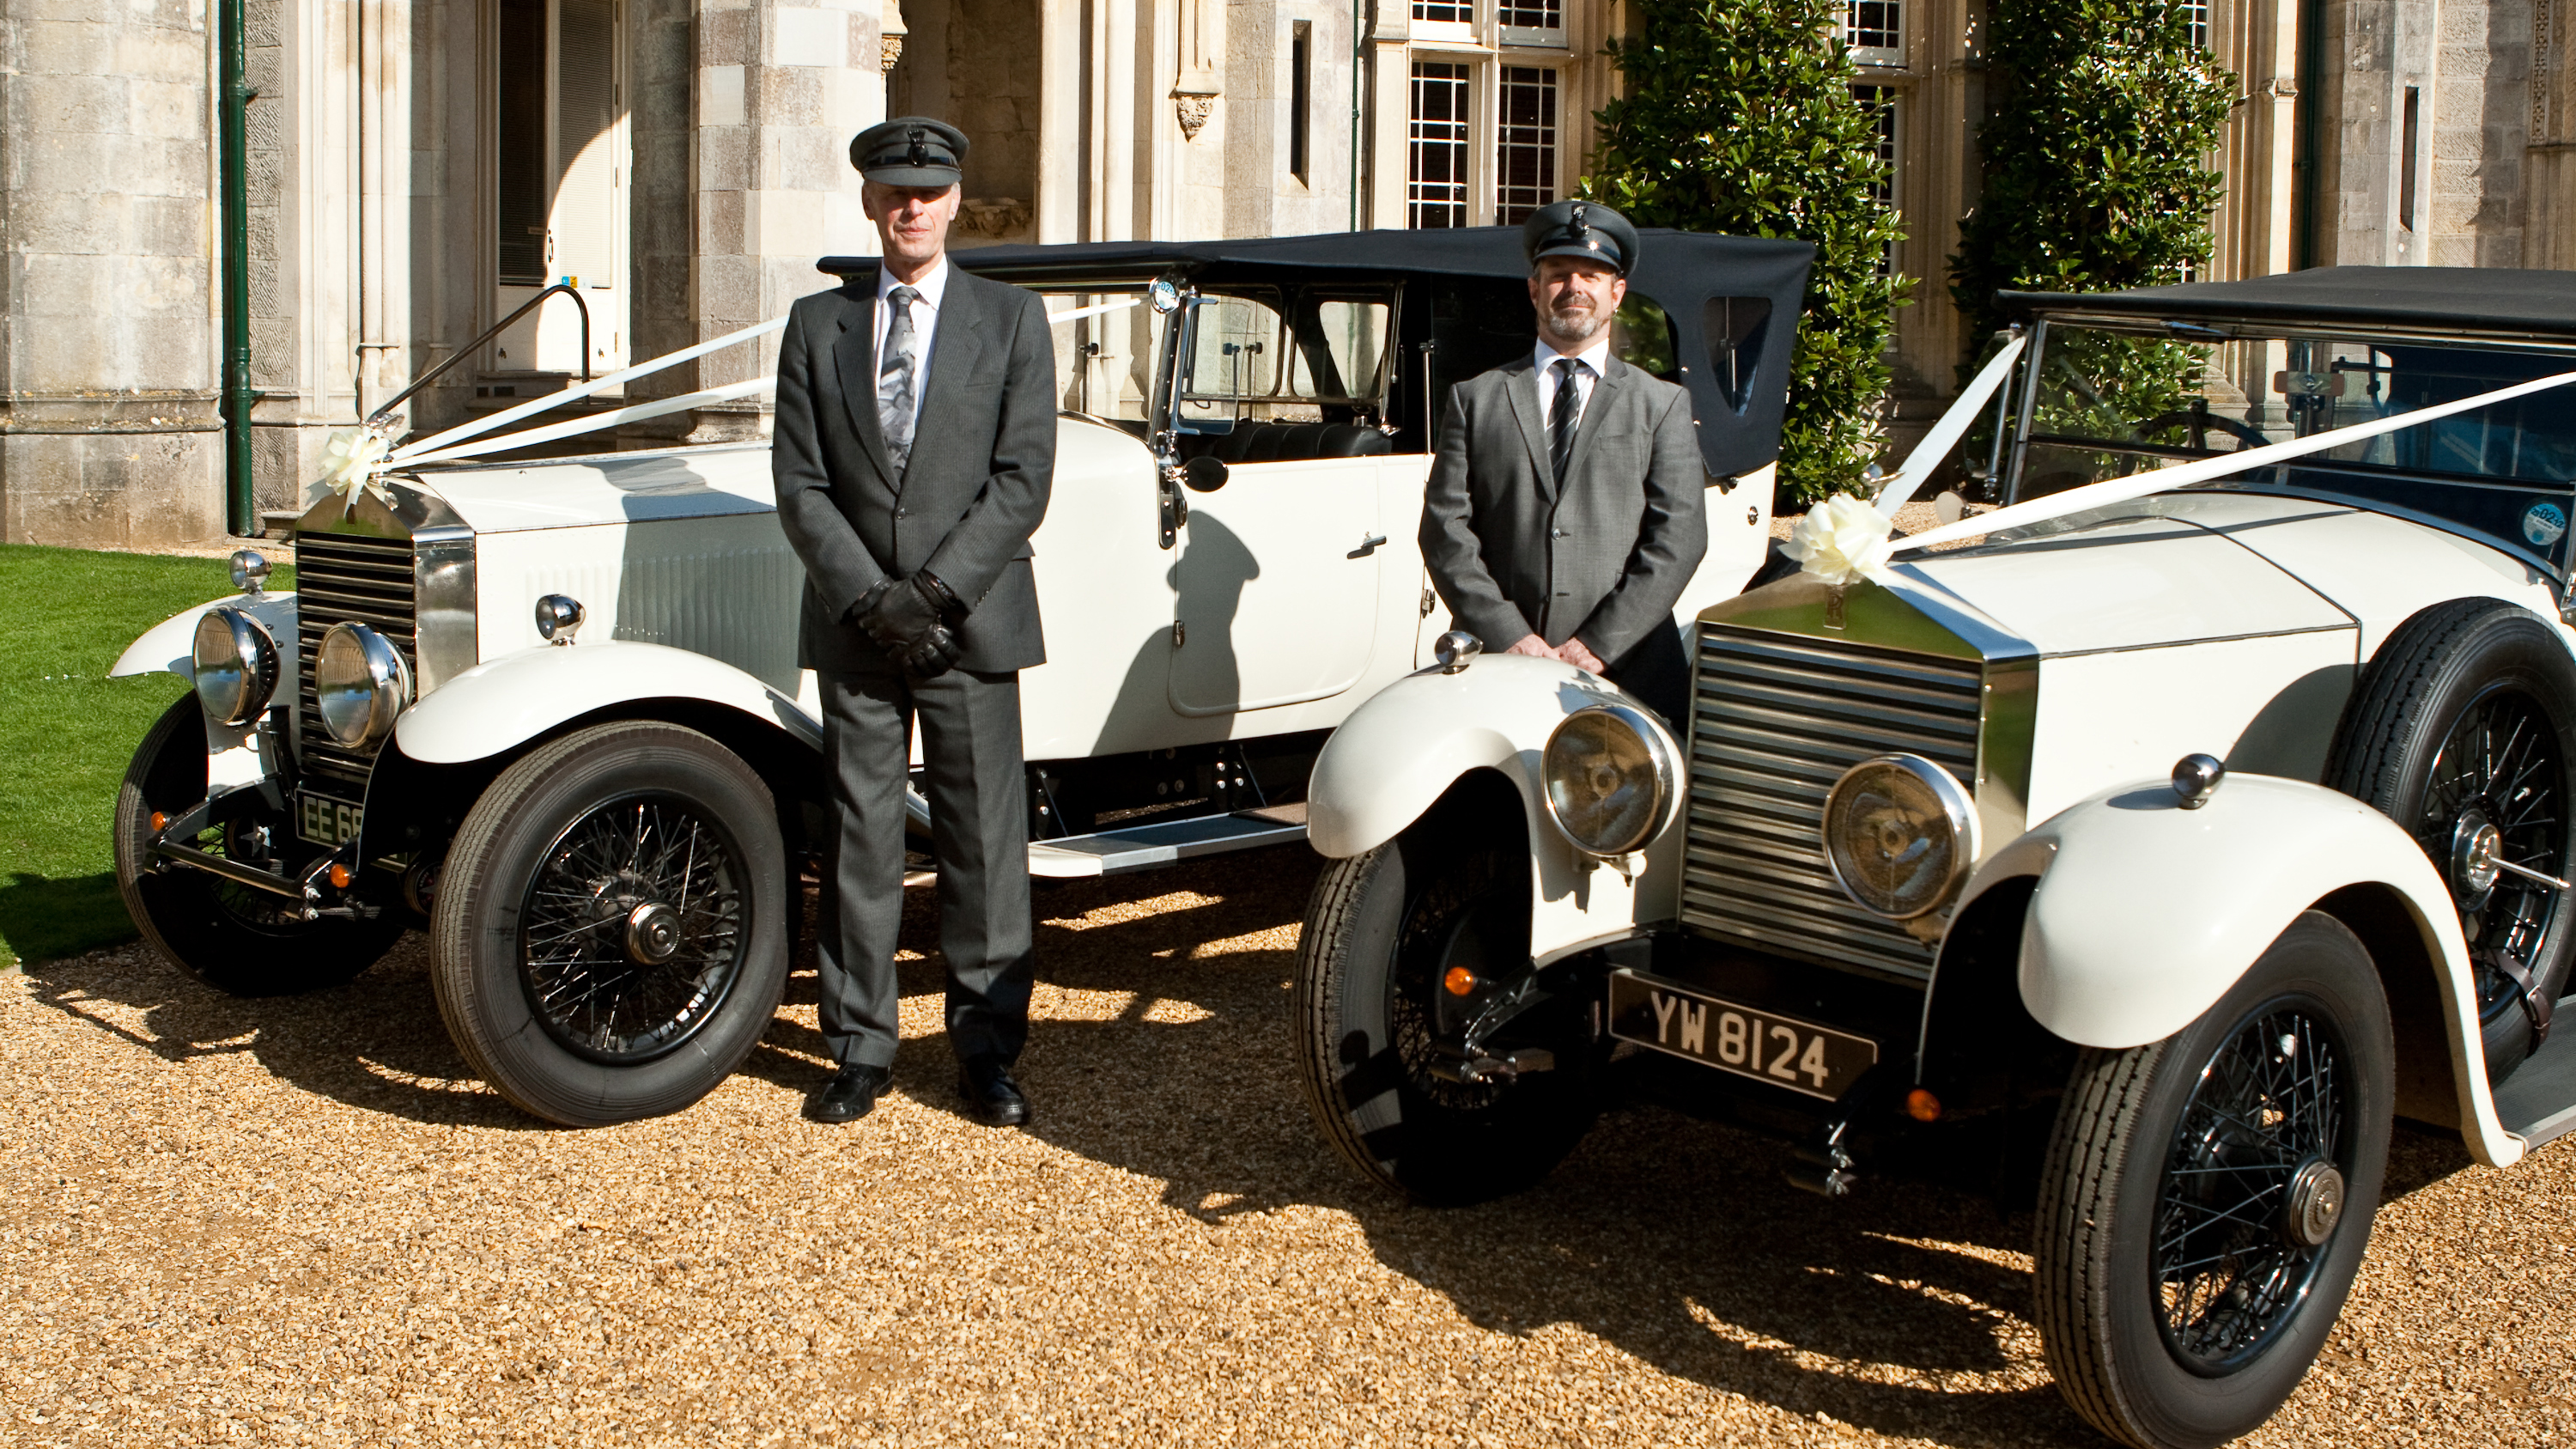 Two vintage wedding cars decorated with white ribbons and bows at a local Sherborne wedding. Both vehicles are parked side-by-side with their chauffeurs next to them.